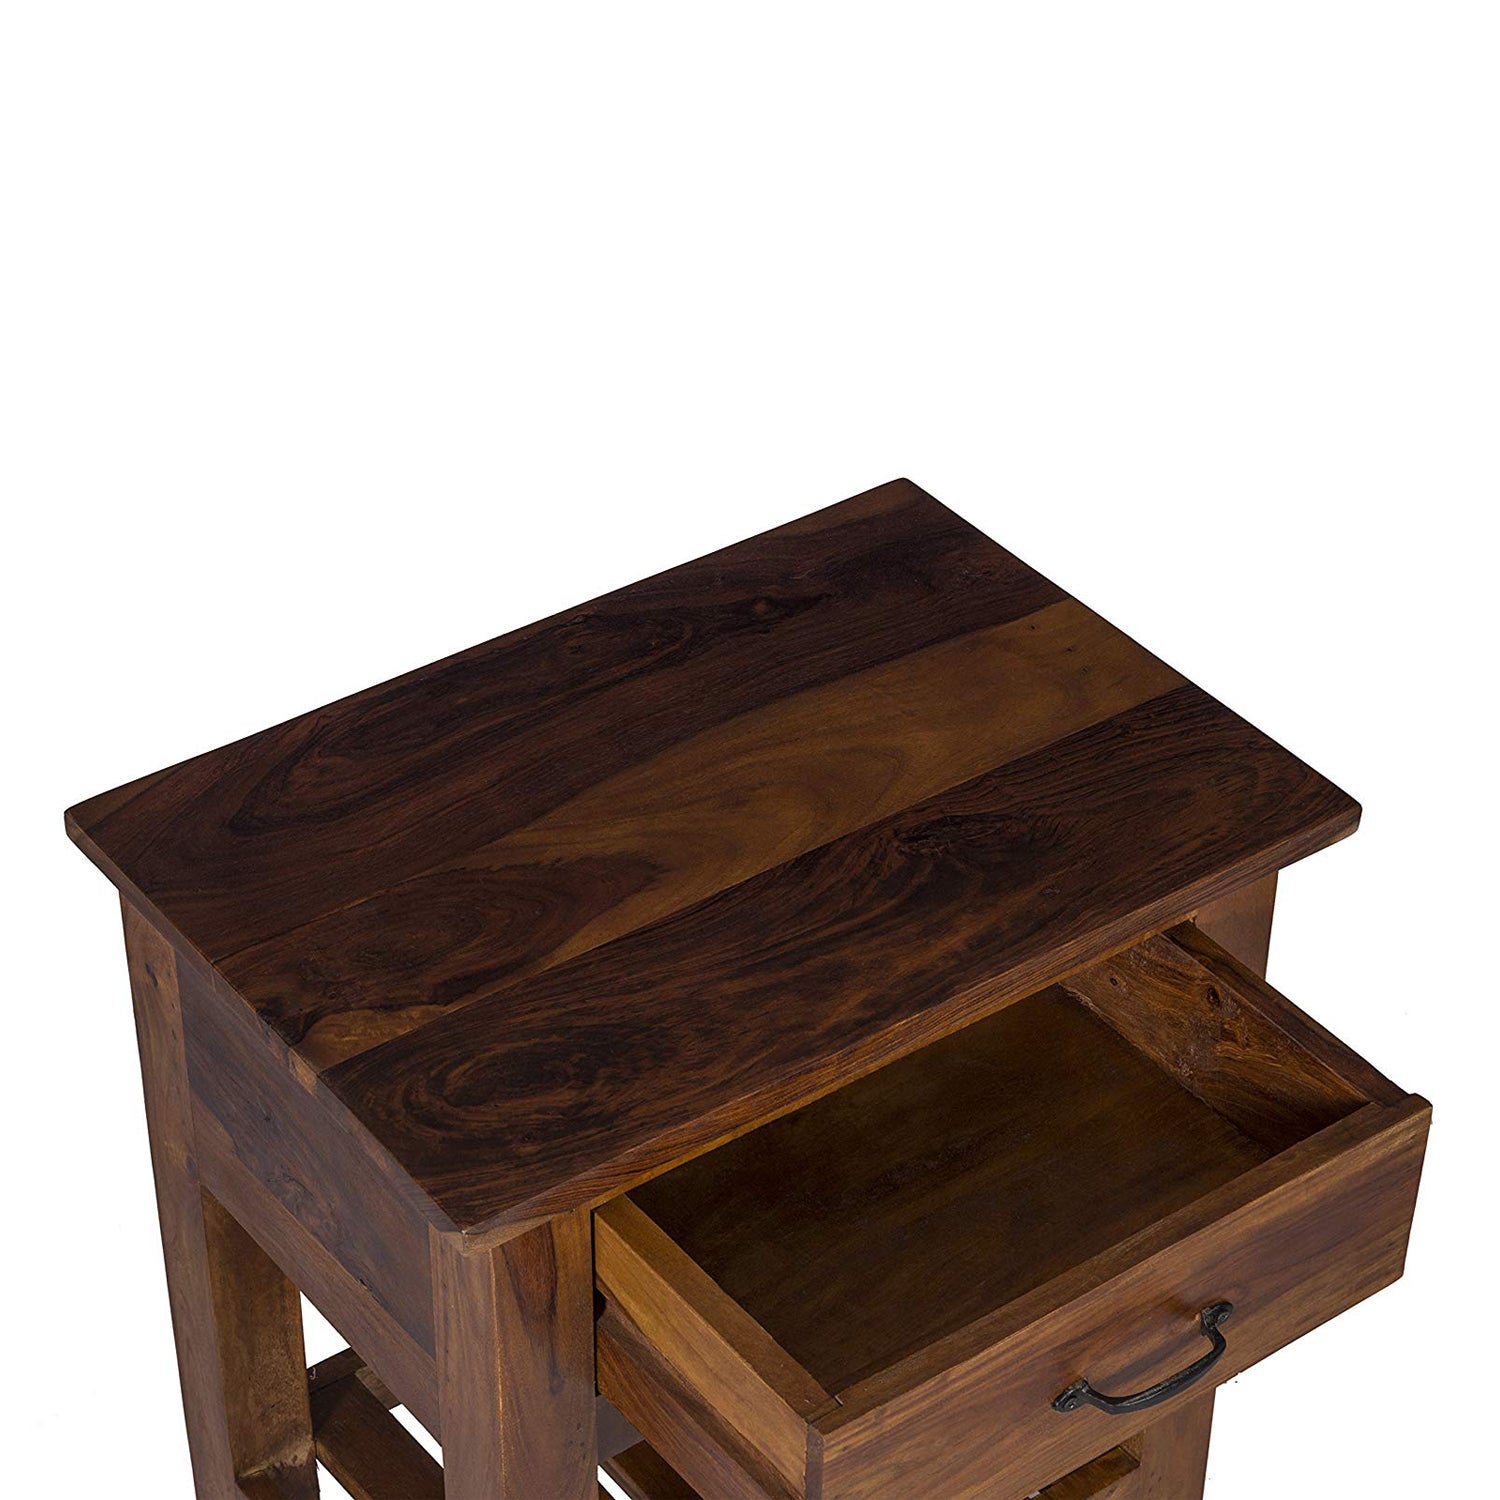 Wooden End Table with 2 Shelves and 1 Drawer - Stylla London